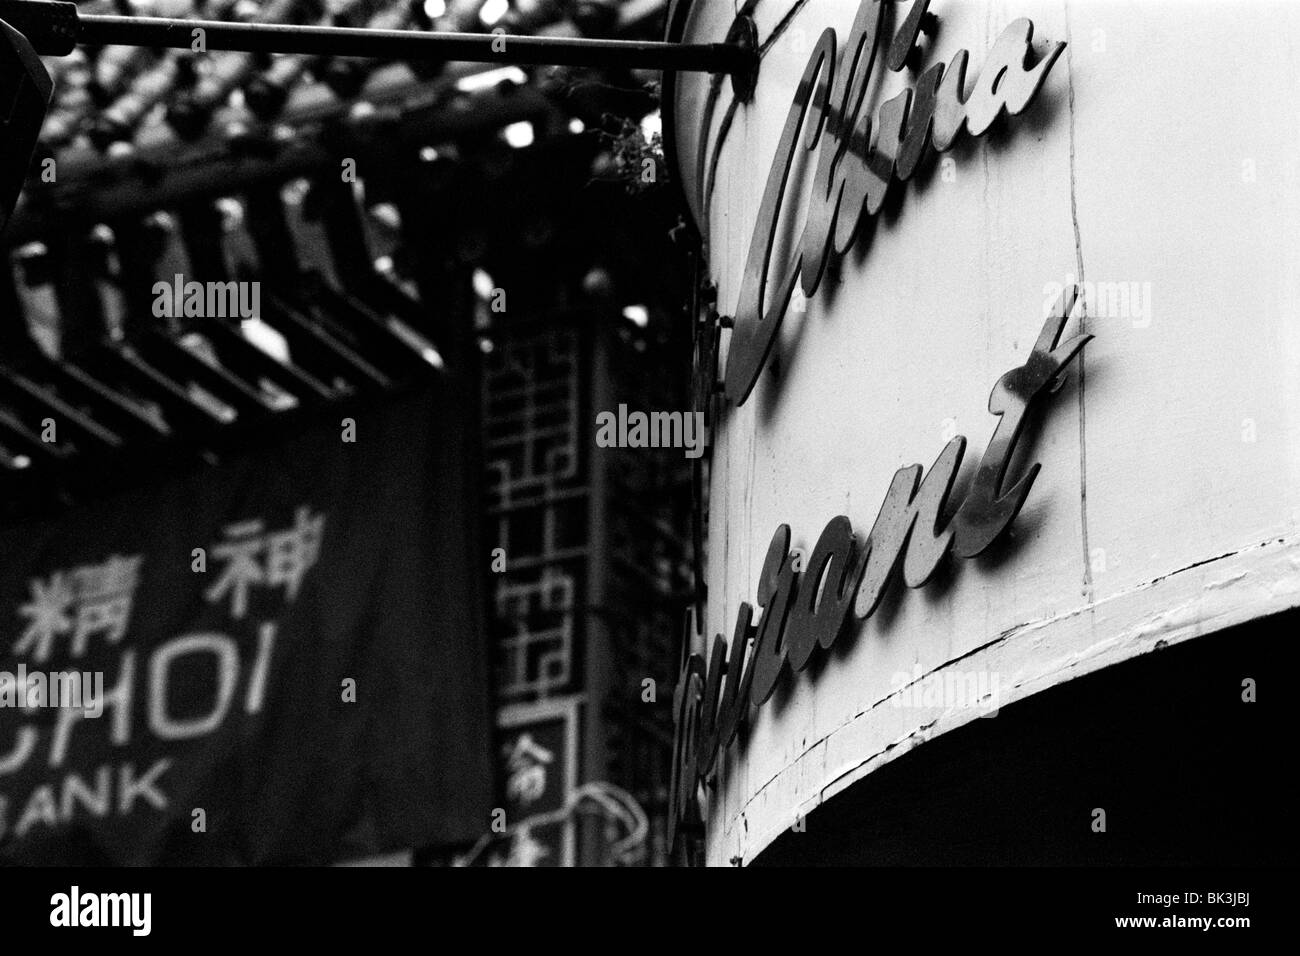 A local restaurant on Gerrard street in early nineties Chinatown, London. Stock Photo